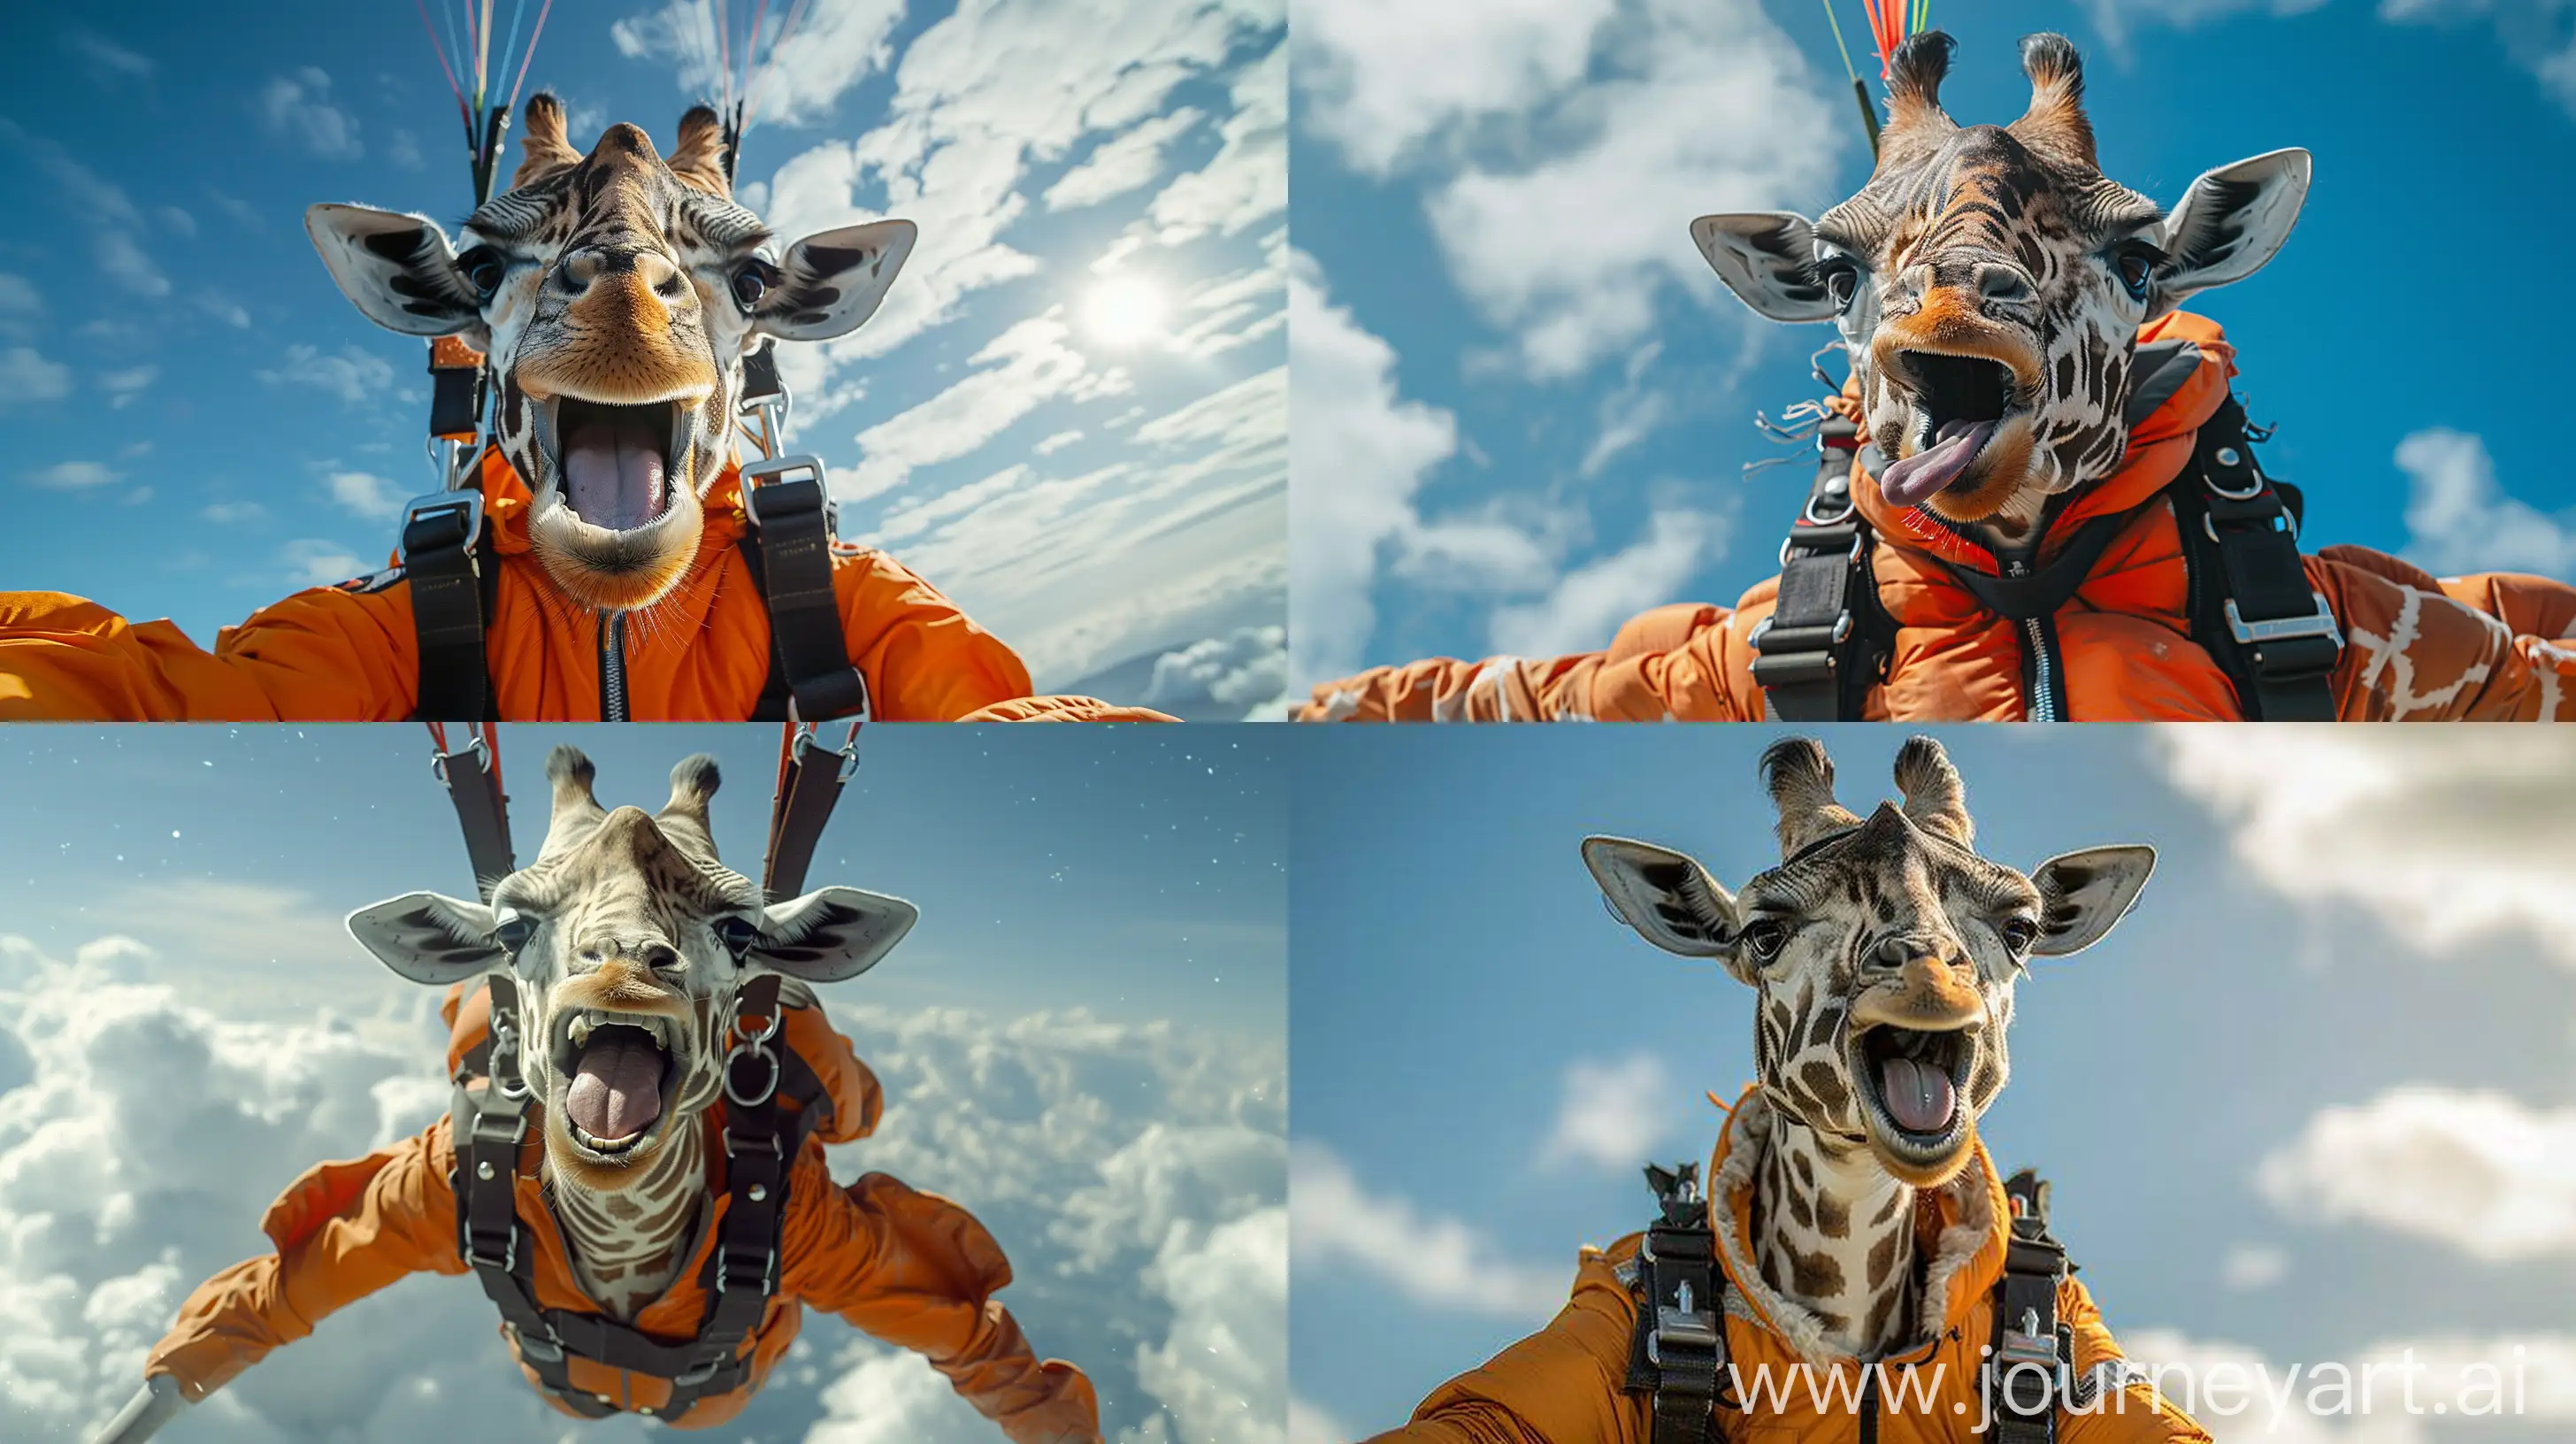 The photo is a close-up of a giraffe that appears to be in the air, against a background of a blue sky and white clouds
She wears parachute gear, complete with an orange bodysuit that has black straps, suggesting a harness intended for aerial activities. There is also a pair of goggles tied over the giraffe's forehead, pressed down as if they are not currently in use. Glasses and clothing give the impression that the giraffe is participating in a skydive or skydive.
The giraffe's mouth is open, and the tongue hangs out to the side in what could be interpreted as an expression of excitement or joy. Its limbs are extended, with the front legs extending forward and the hind legs extending back, enhancing the sensation of free fall or flight.
The angle and position of the giraffe give the viewer a dynamic perspective, as if they were falling or flying next to the giraffe. The lighting is bright and suggests daylight conditions, with the sun possibly above and behind the giraffe, creating soft lighting around the coat.
The image is likely to be humorous or fictional, humanizing the giraffe by placing it in the context of an unusual human activity. This could be a creative edit --ar 16:9 --v 6 --stylize 750.